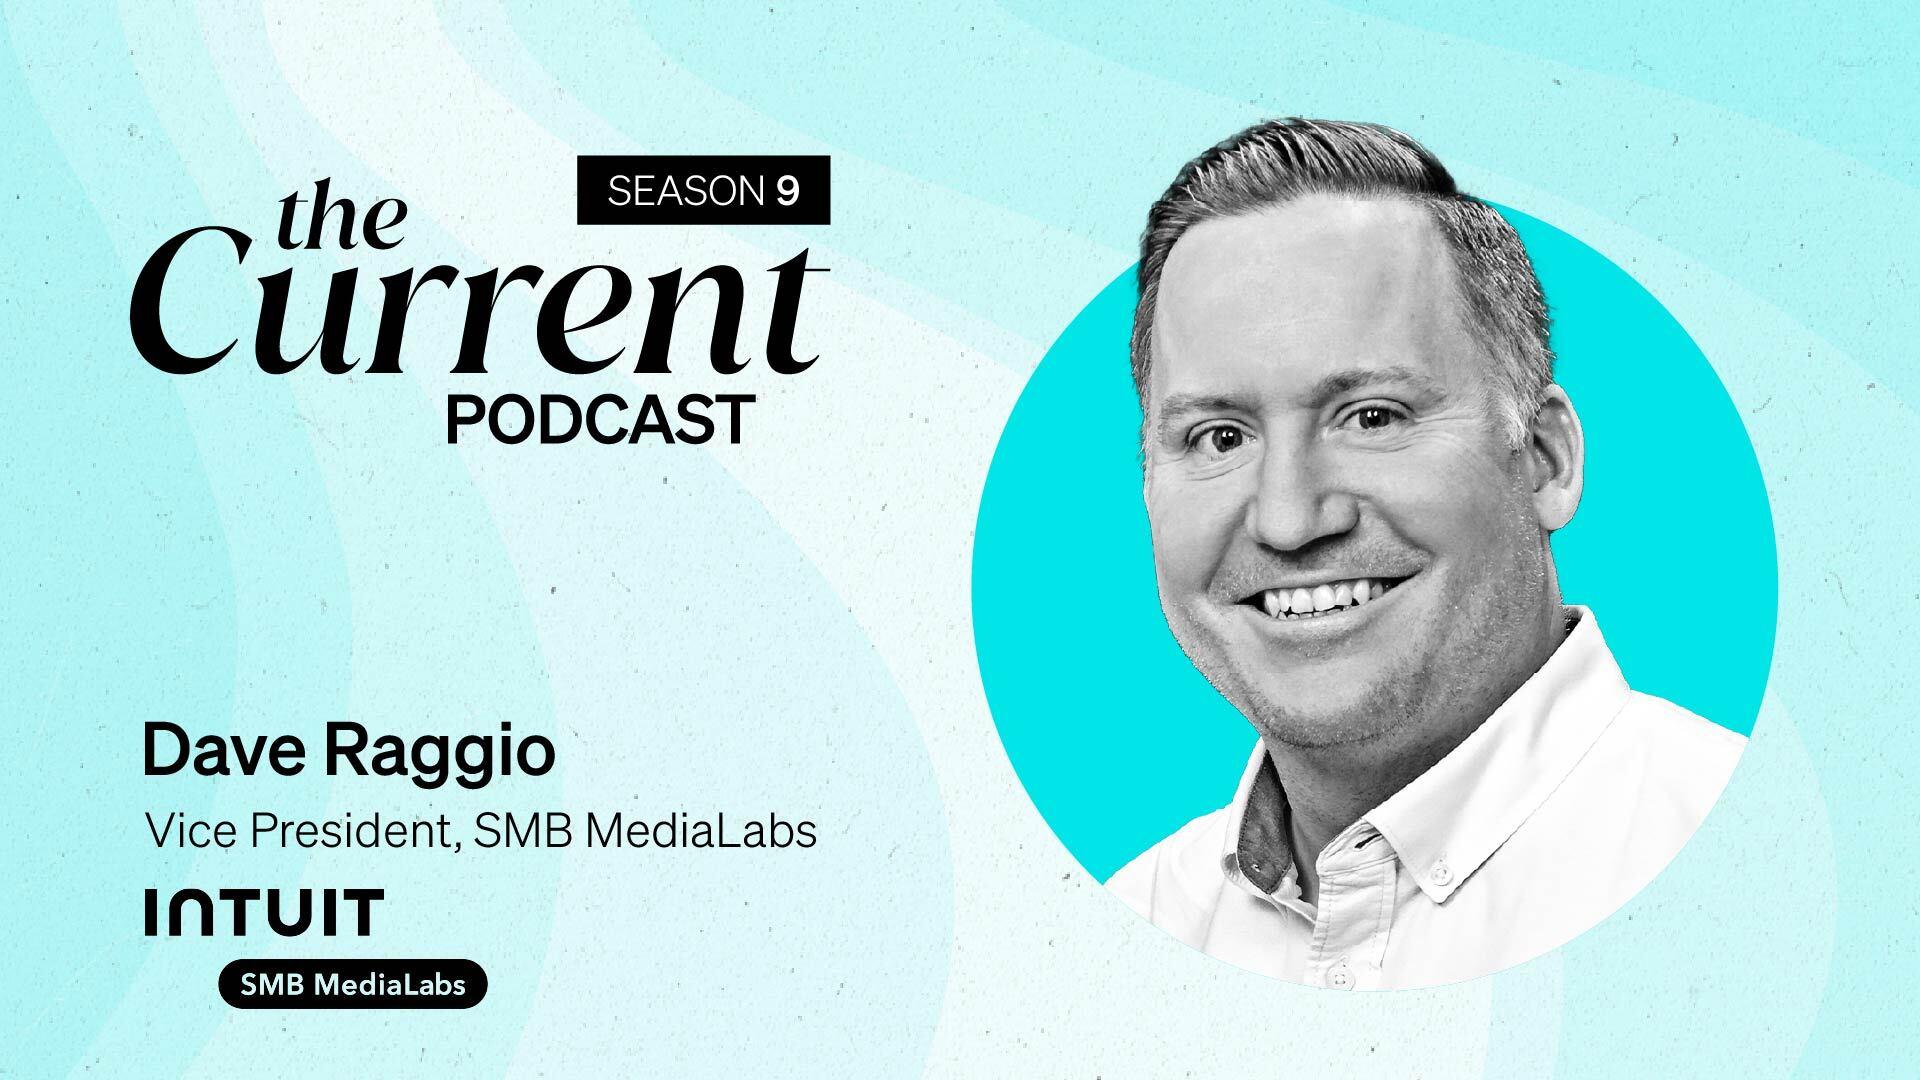 The Current Podcast: Dave Raggio, VP,  Intuit, SMB MediaLabs.